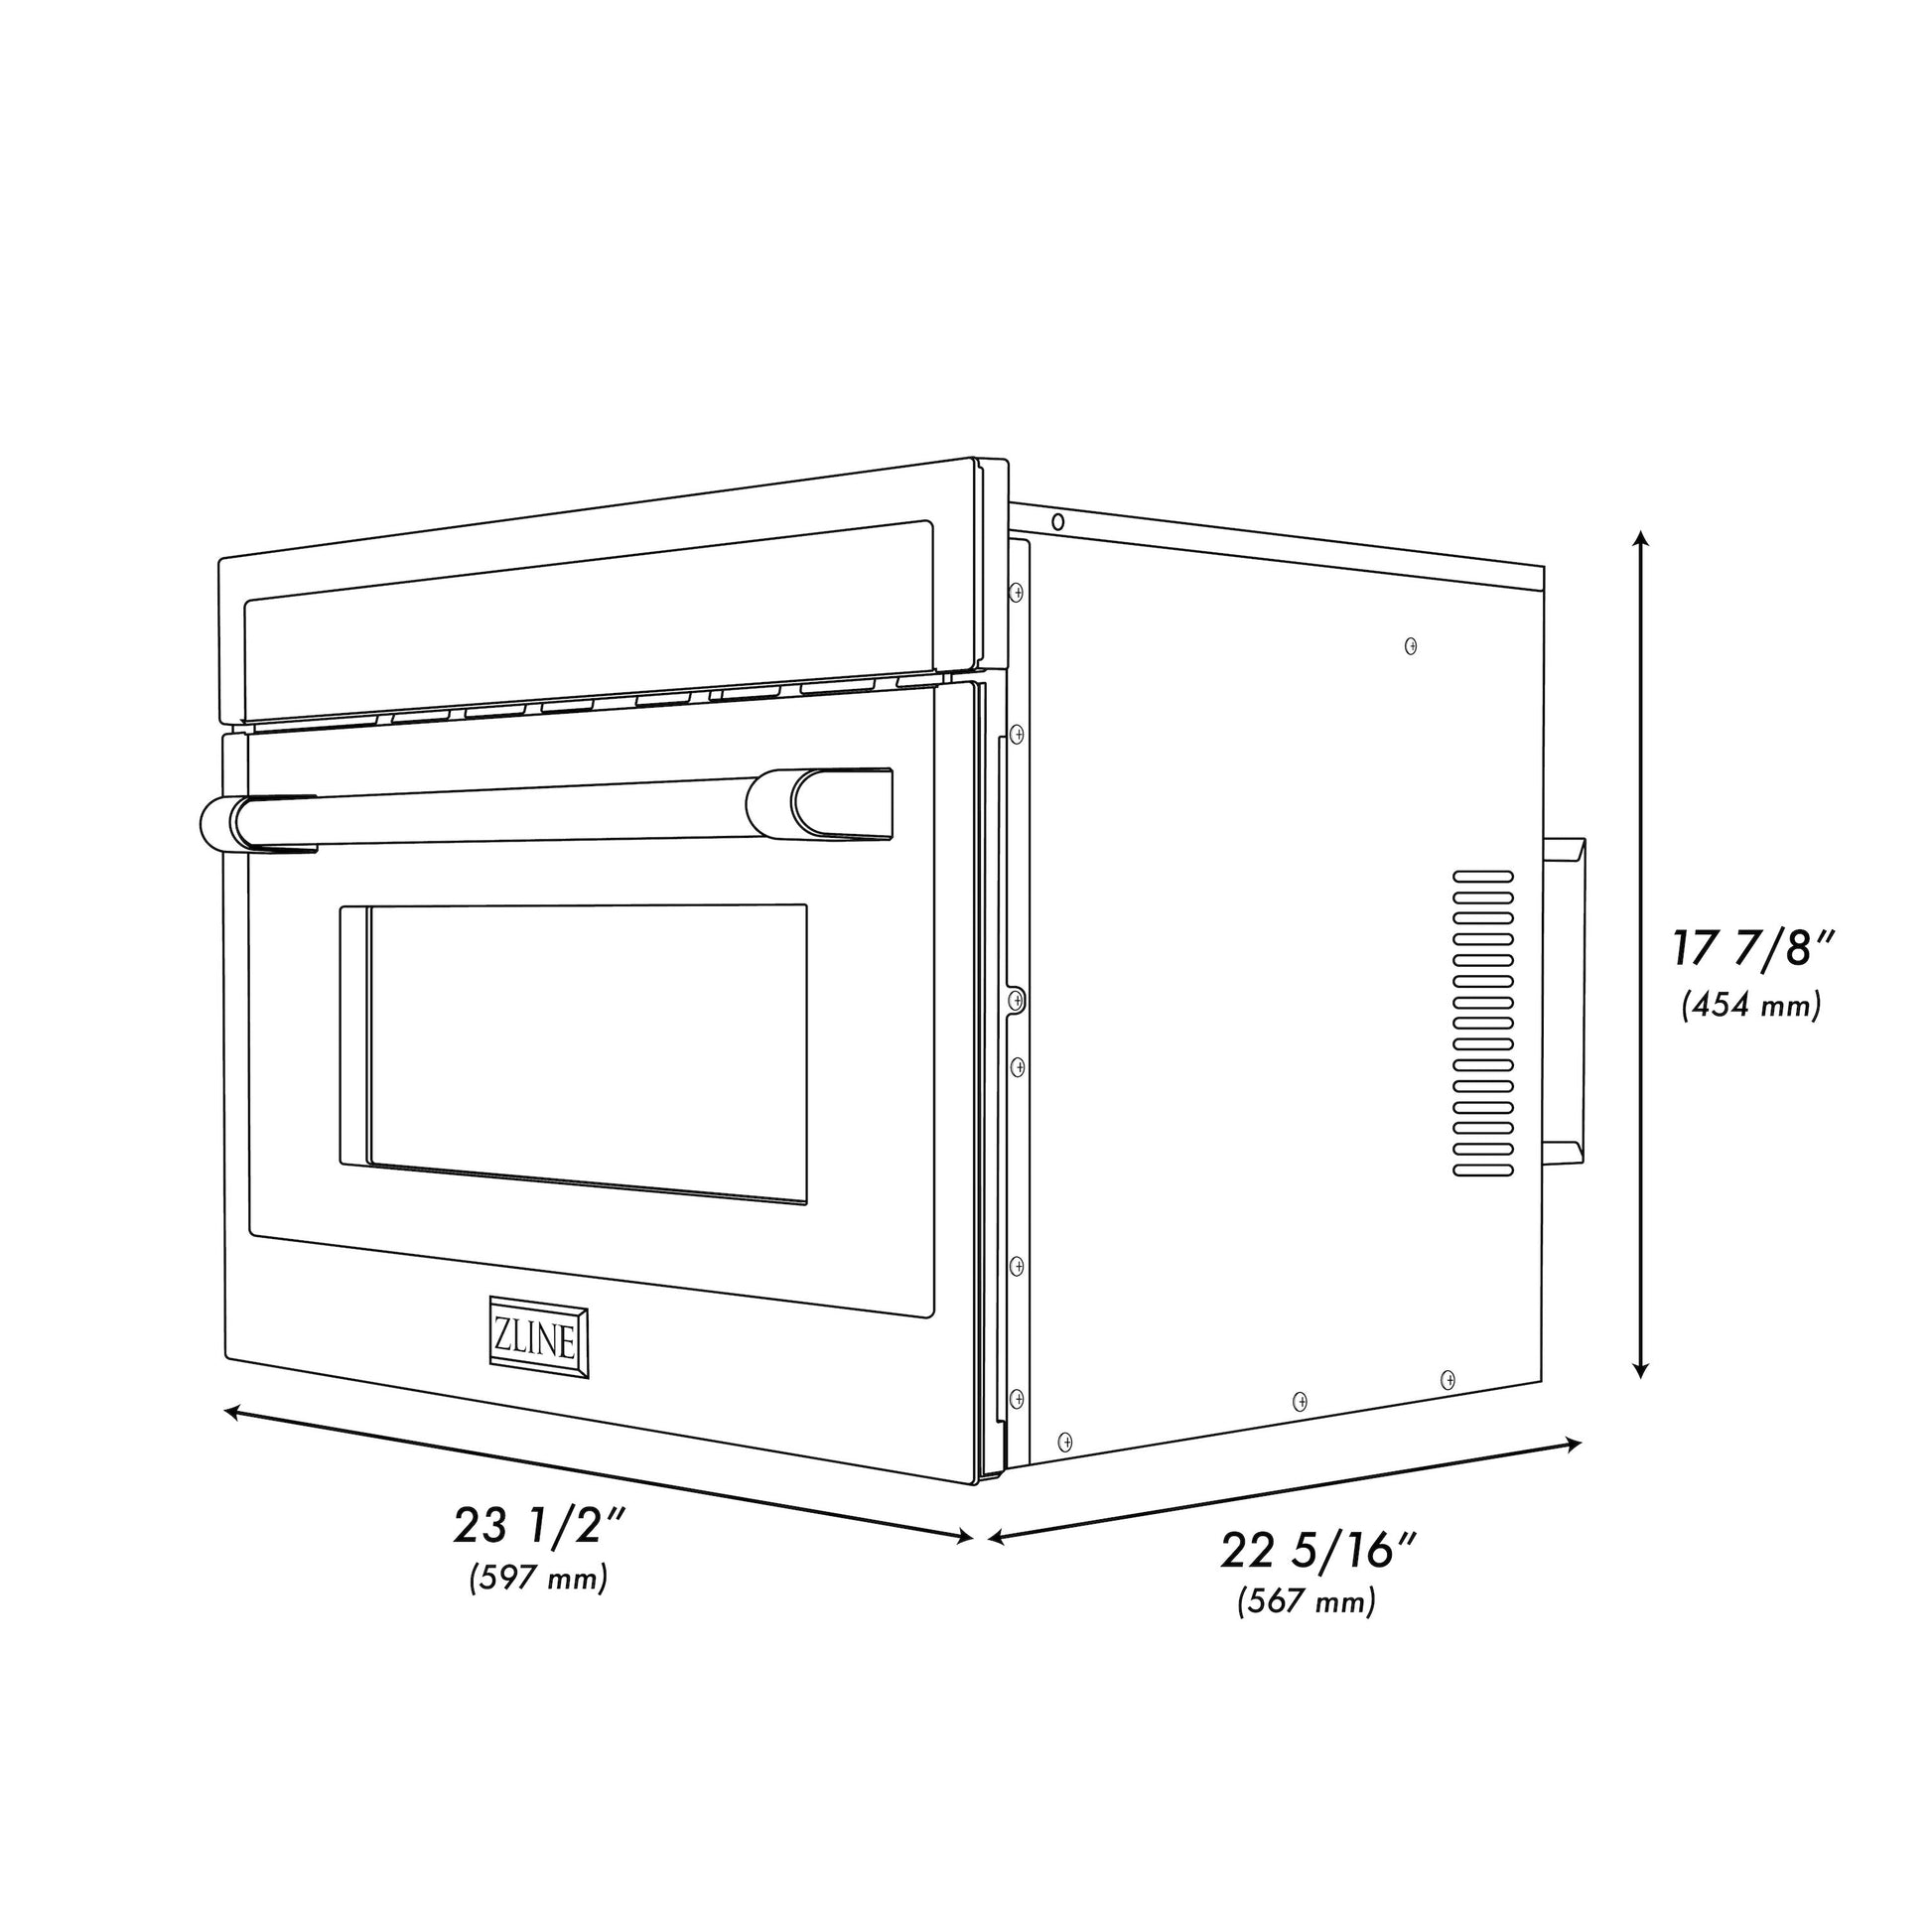 ZLINE 24 in. Black Stainless Steel Built-in Convection Microwave Oven with Speed and Sensor Cooking (MWO-24-BS) dimensional diagram with measurements.